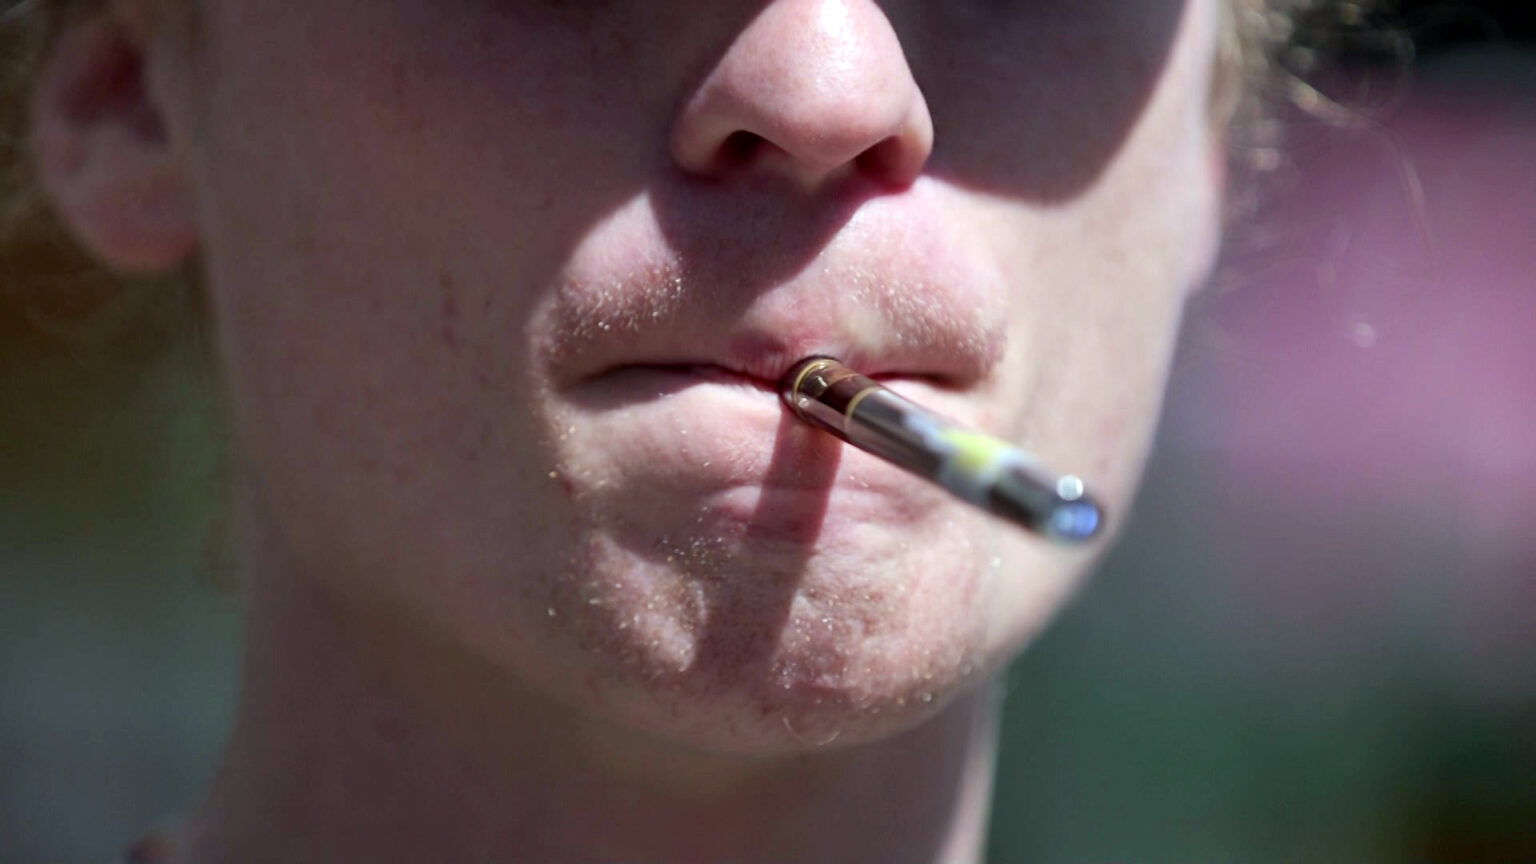 A closeup image shows the lower face of a man who is vaping on an e-cigarette.